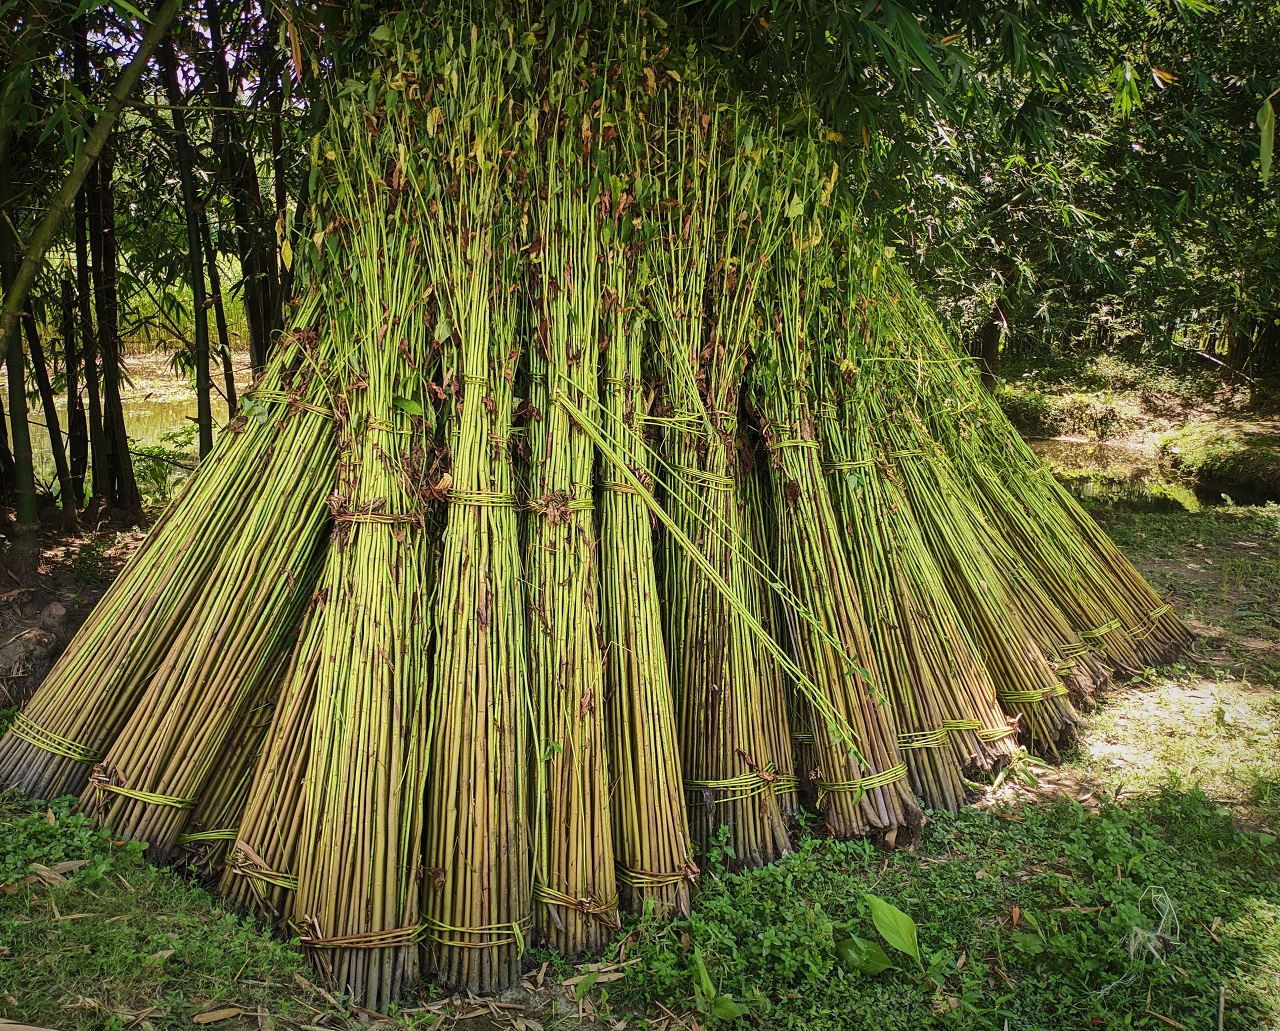 The stalks of the Jute plant are tied together in bundles and soaked in water, a process known as retting.